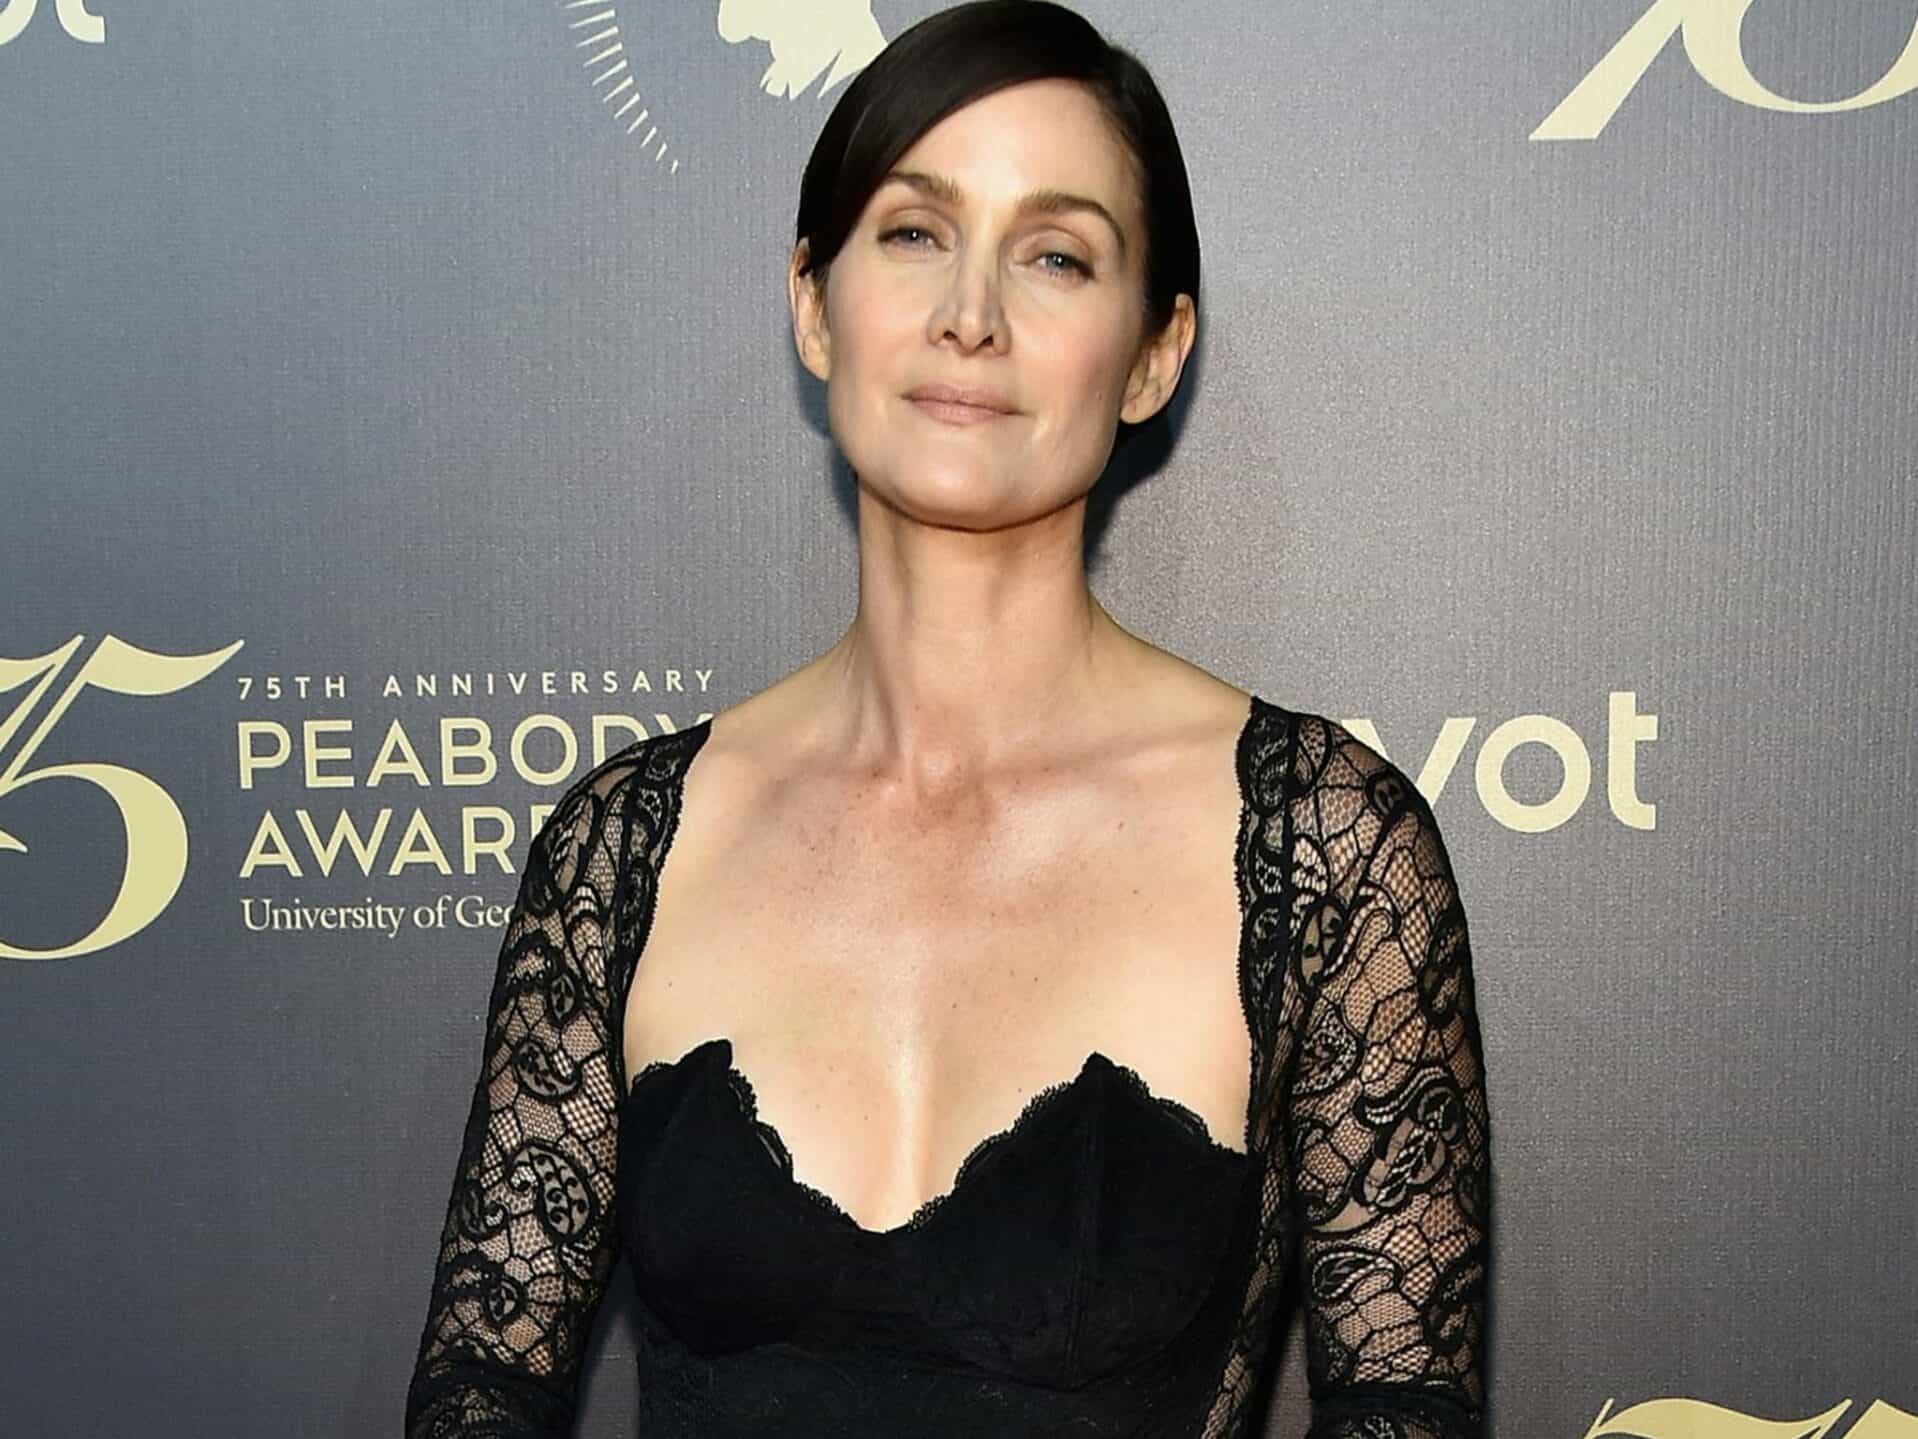 Carrie-Anne Moss has an estimated net worth of around $4 million